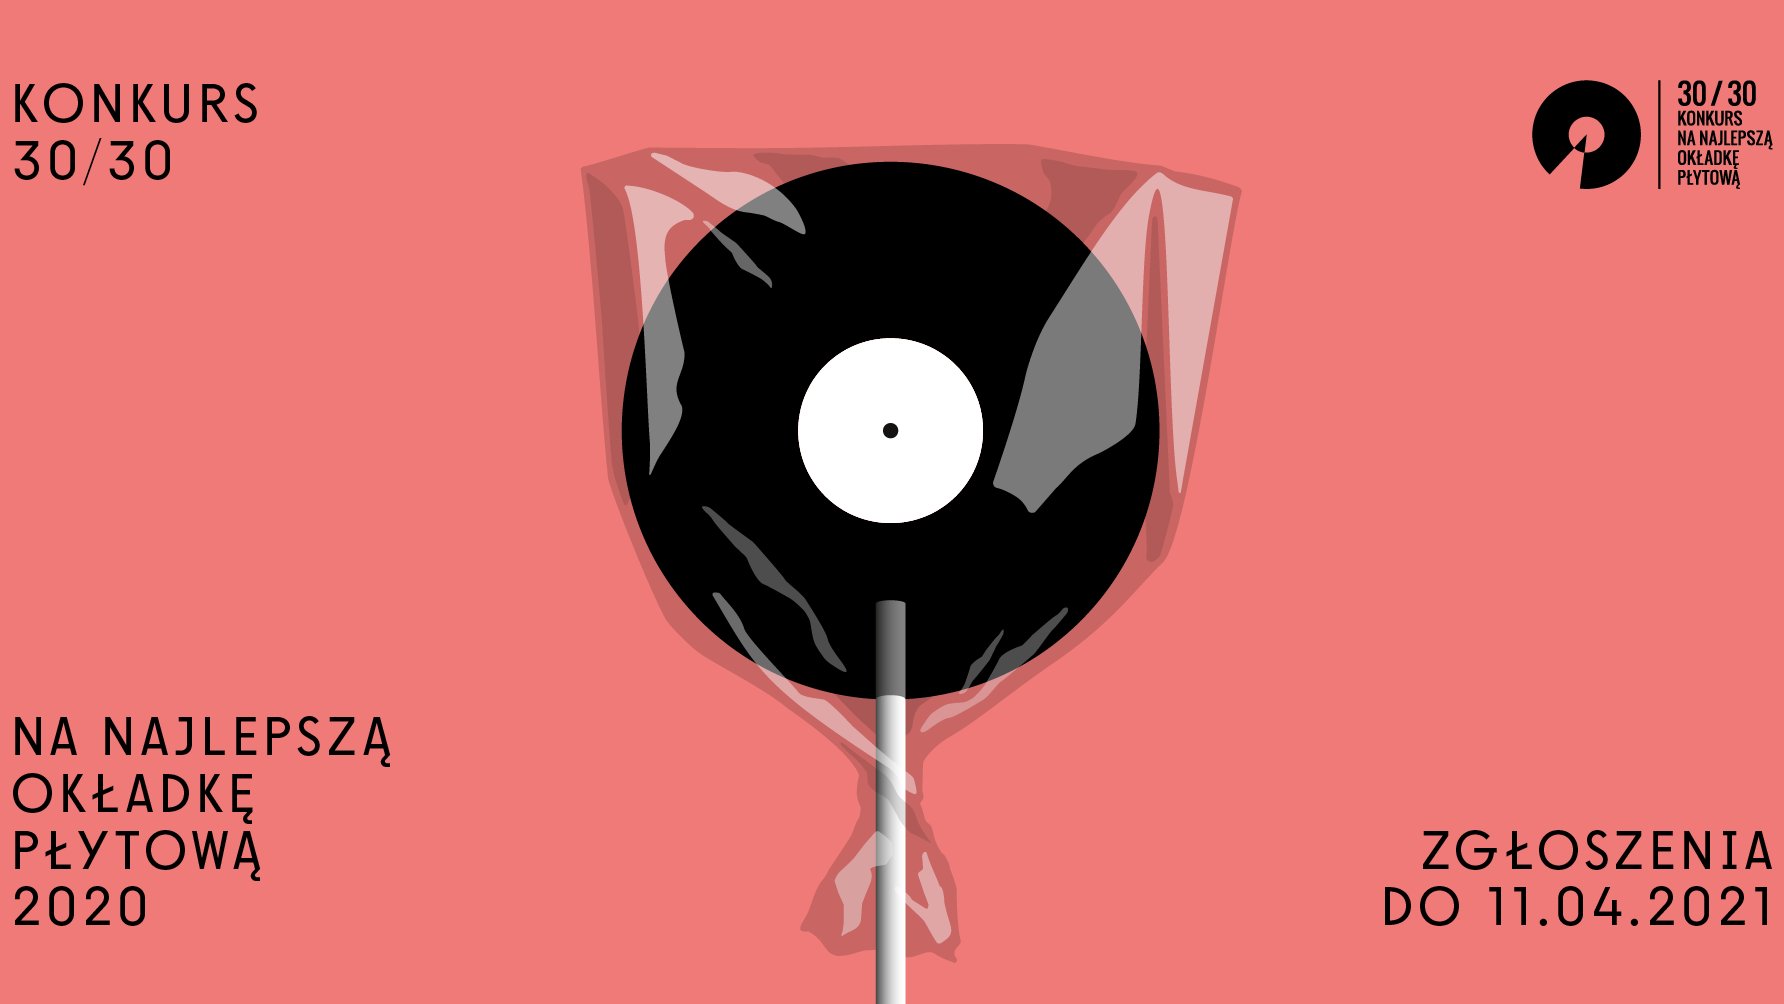 A black record with a stick, which looks like a lollipop, packed in a cellophane, on a pink background.